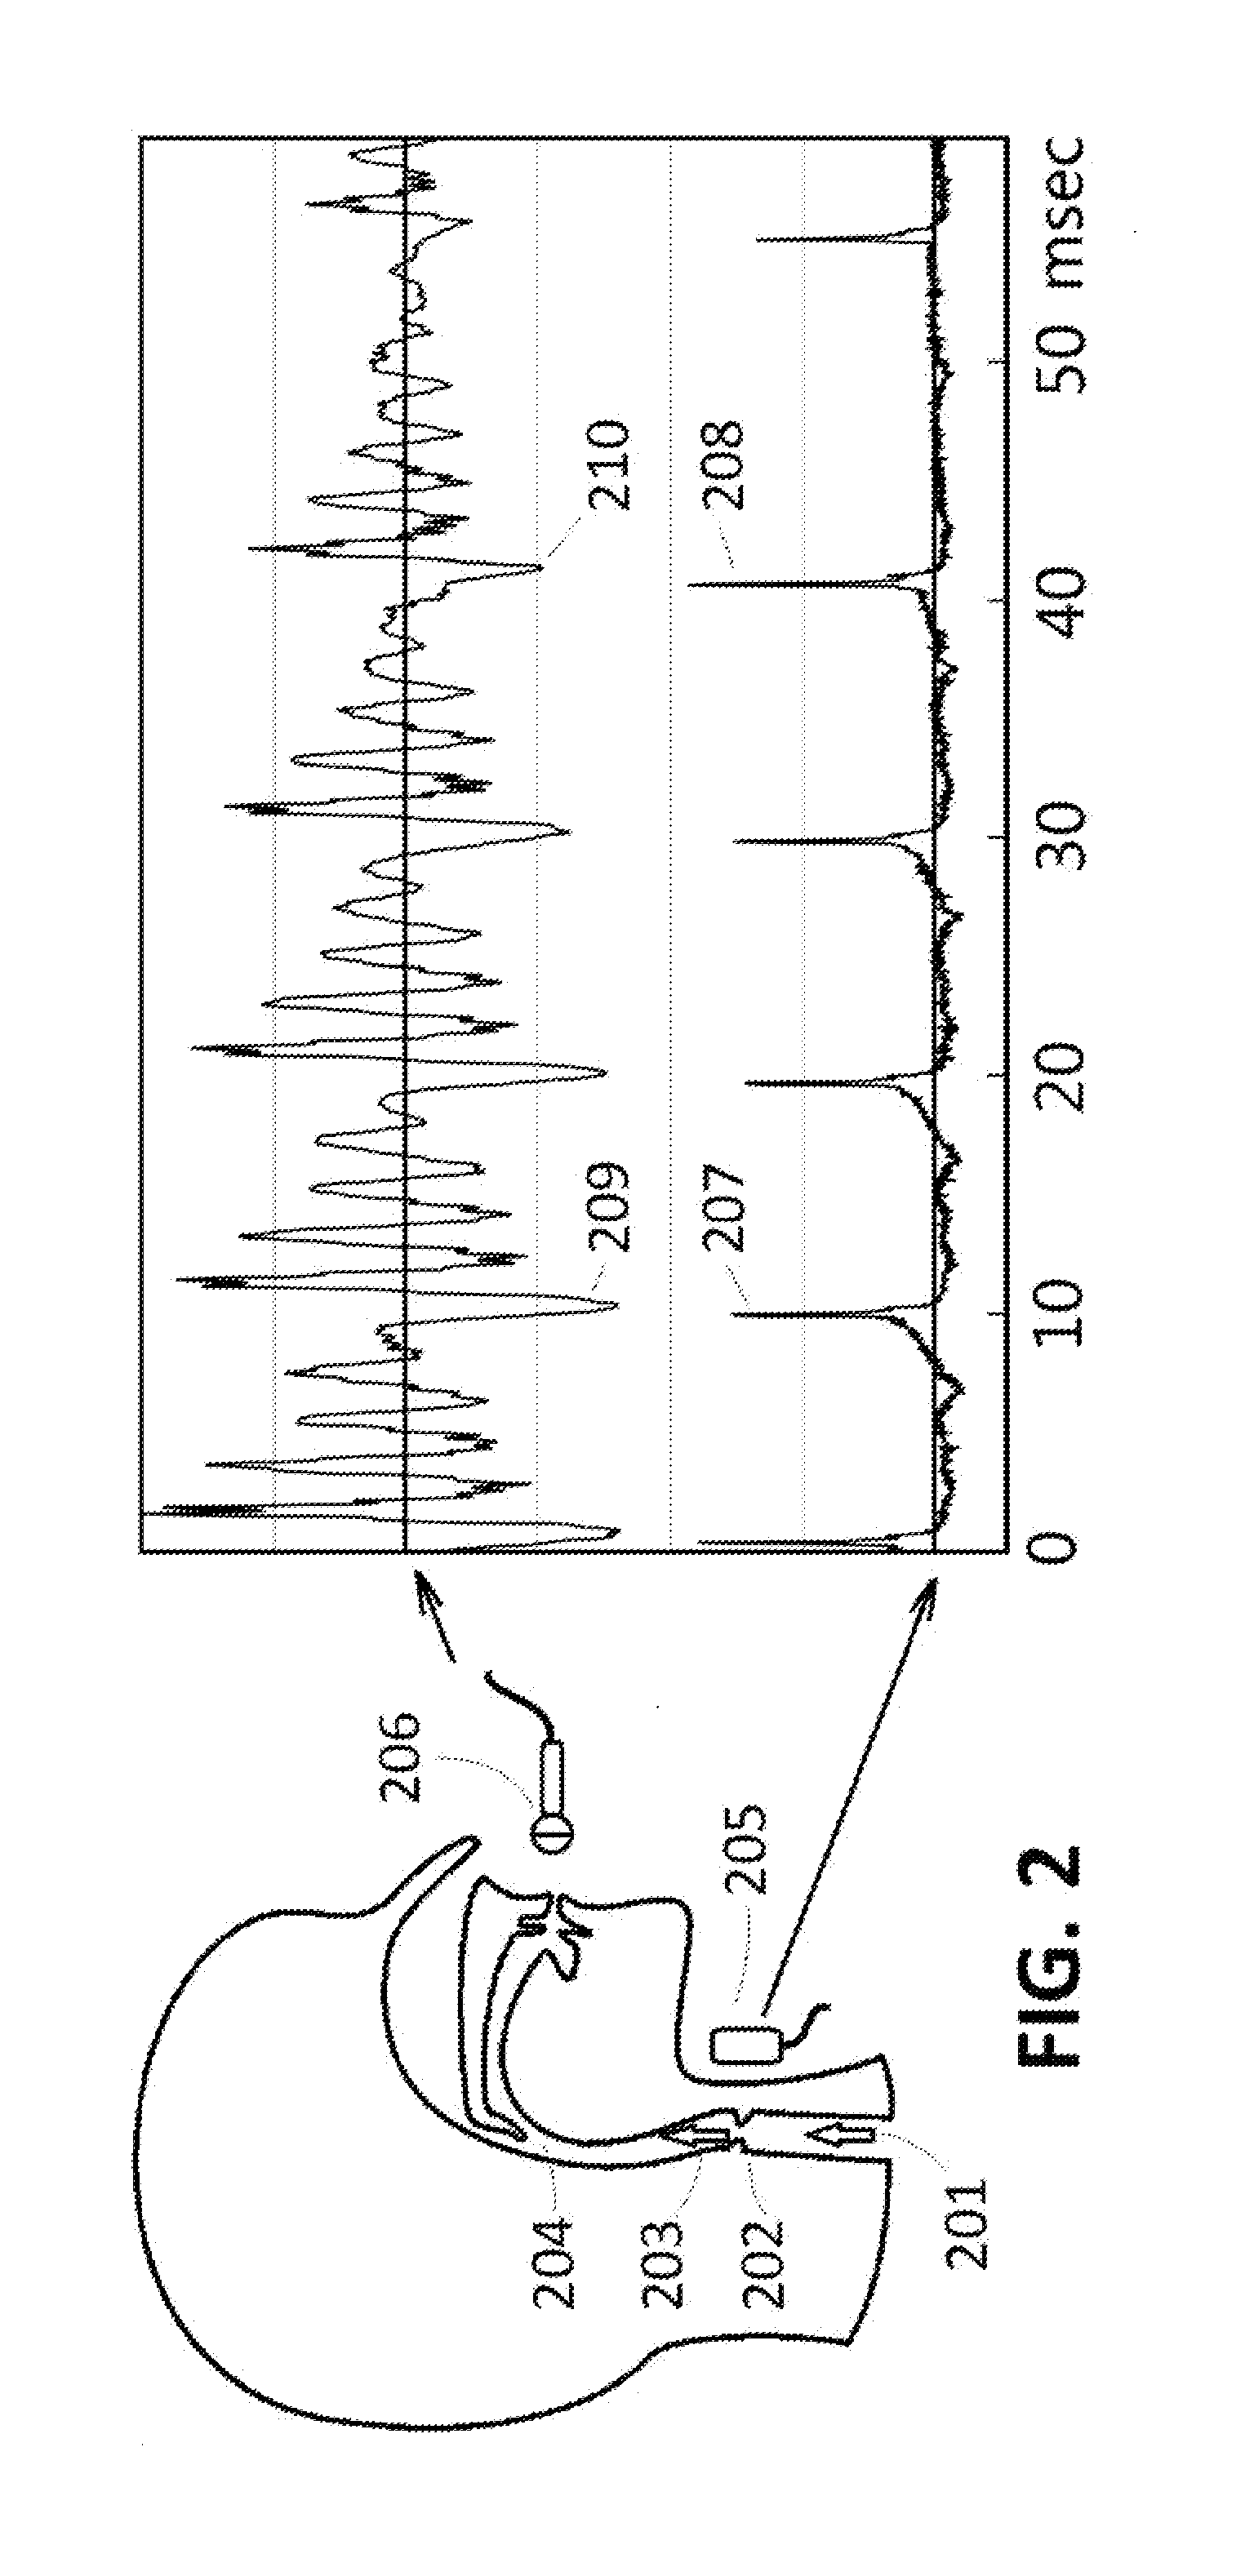 System and method for speech synthesis